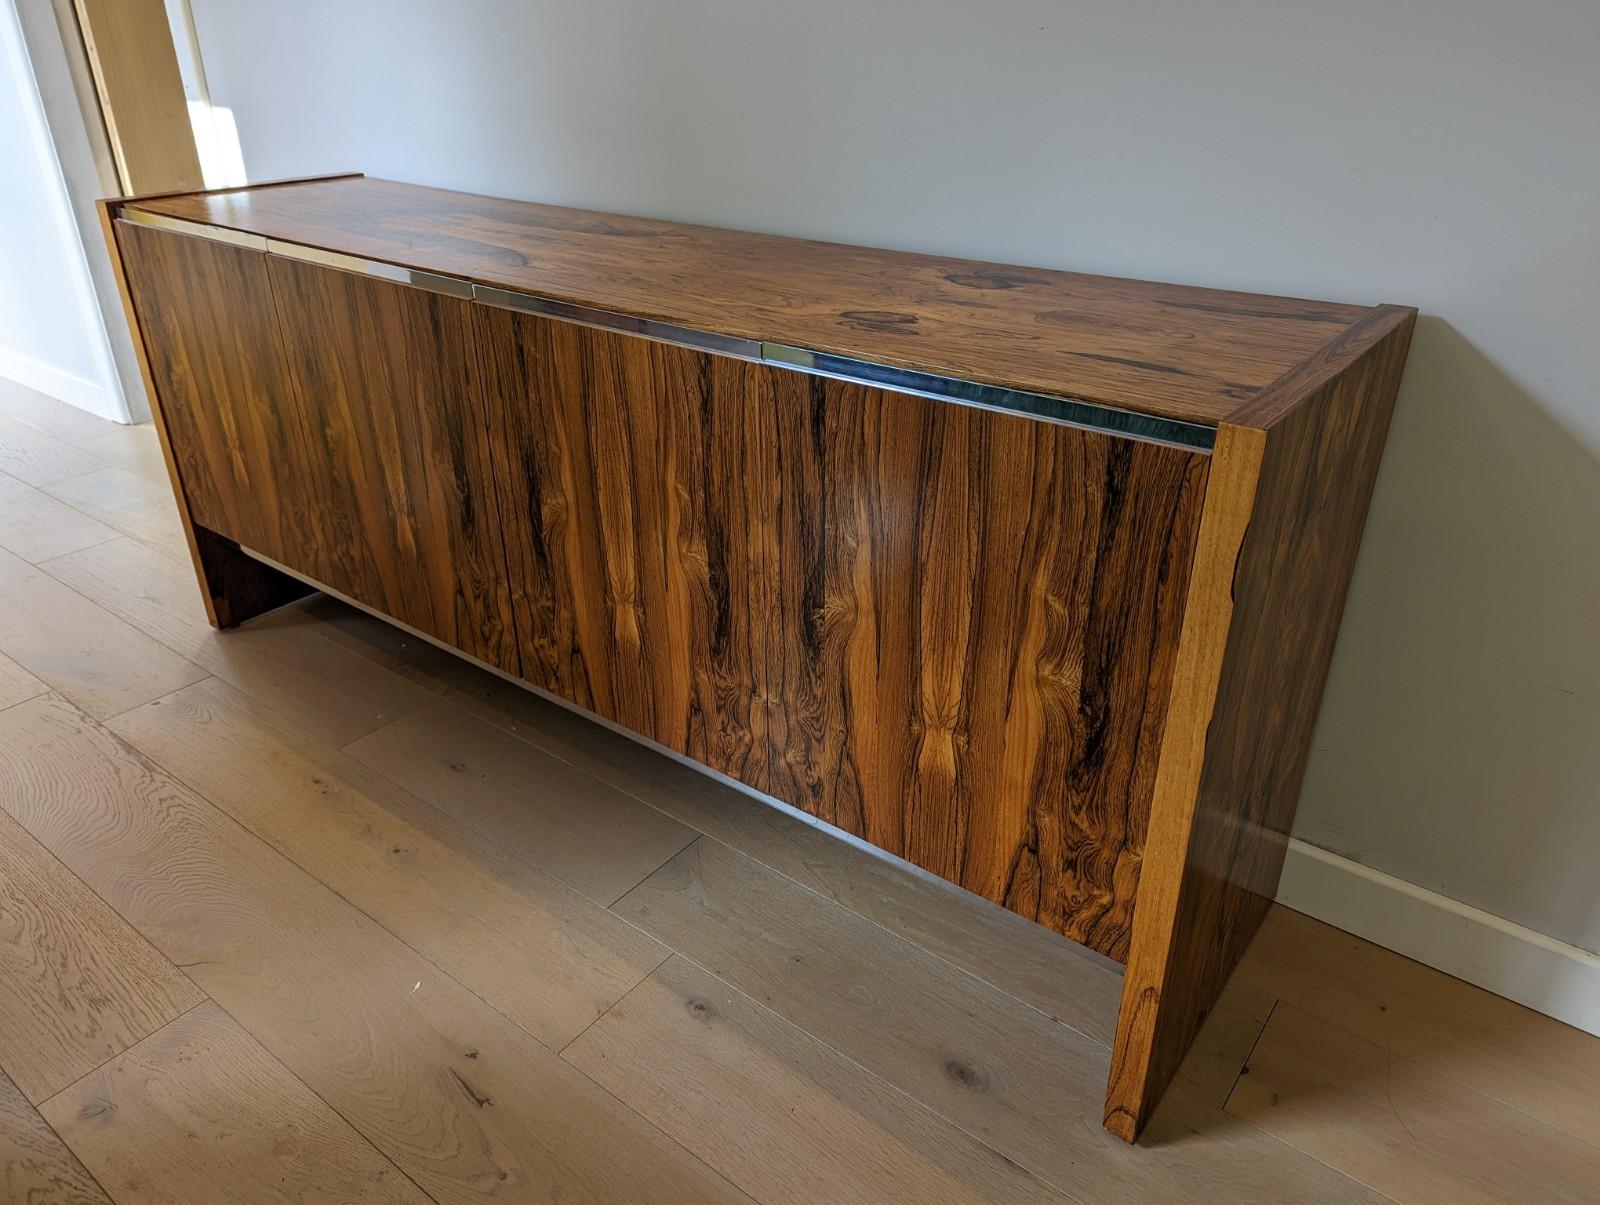 British Mid-Century Rosewood Merrow Associates Sideboard with Chrome, Richard Young